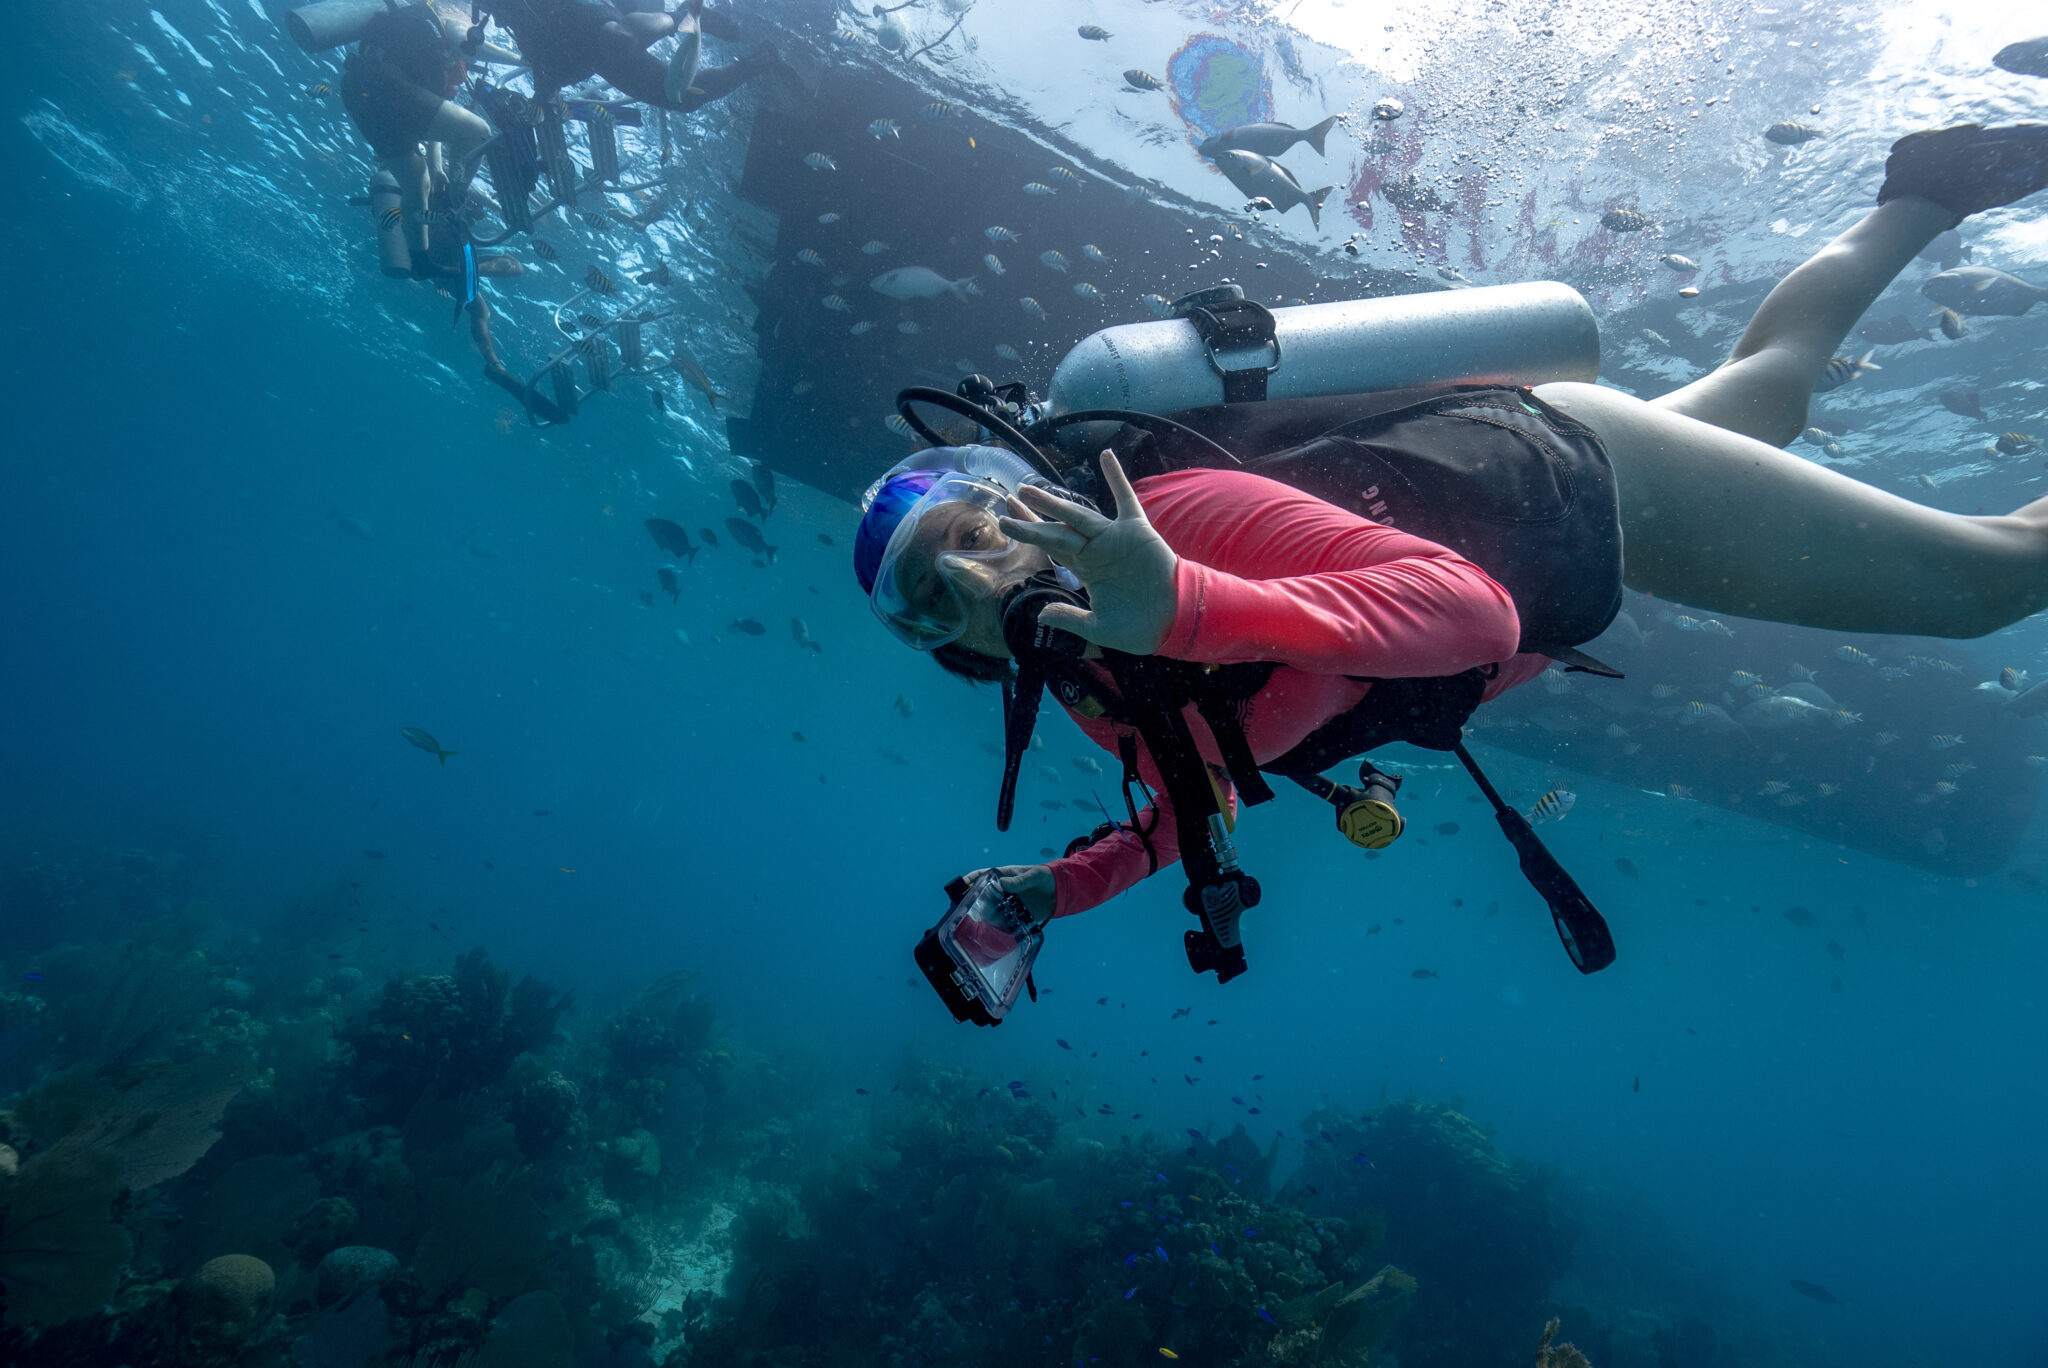 A female scuba diver waves to the camera underwater in Belize while on a PADI Club trip